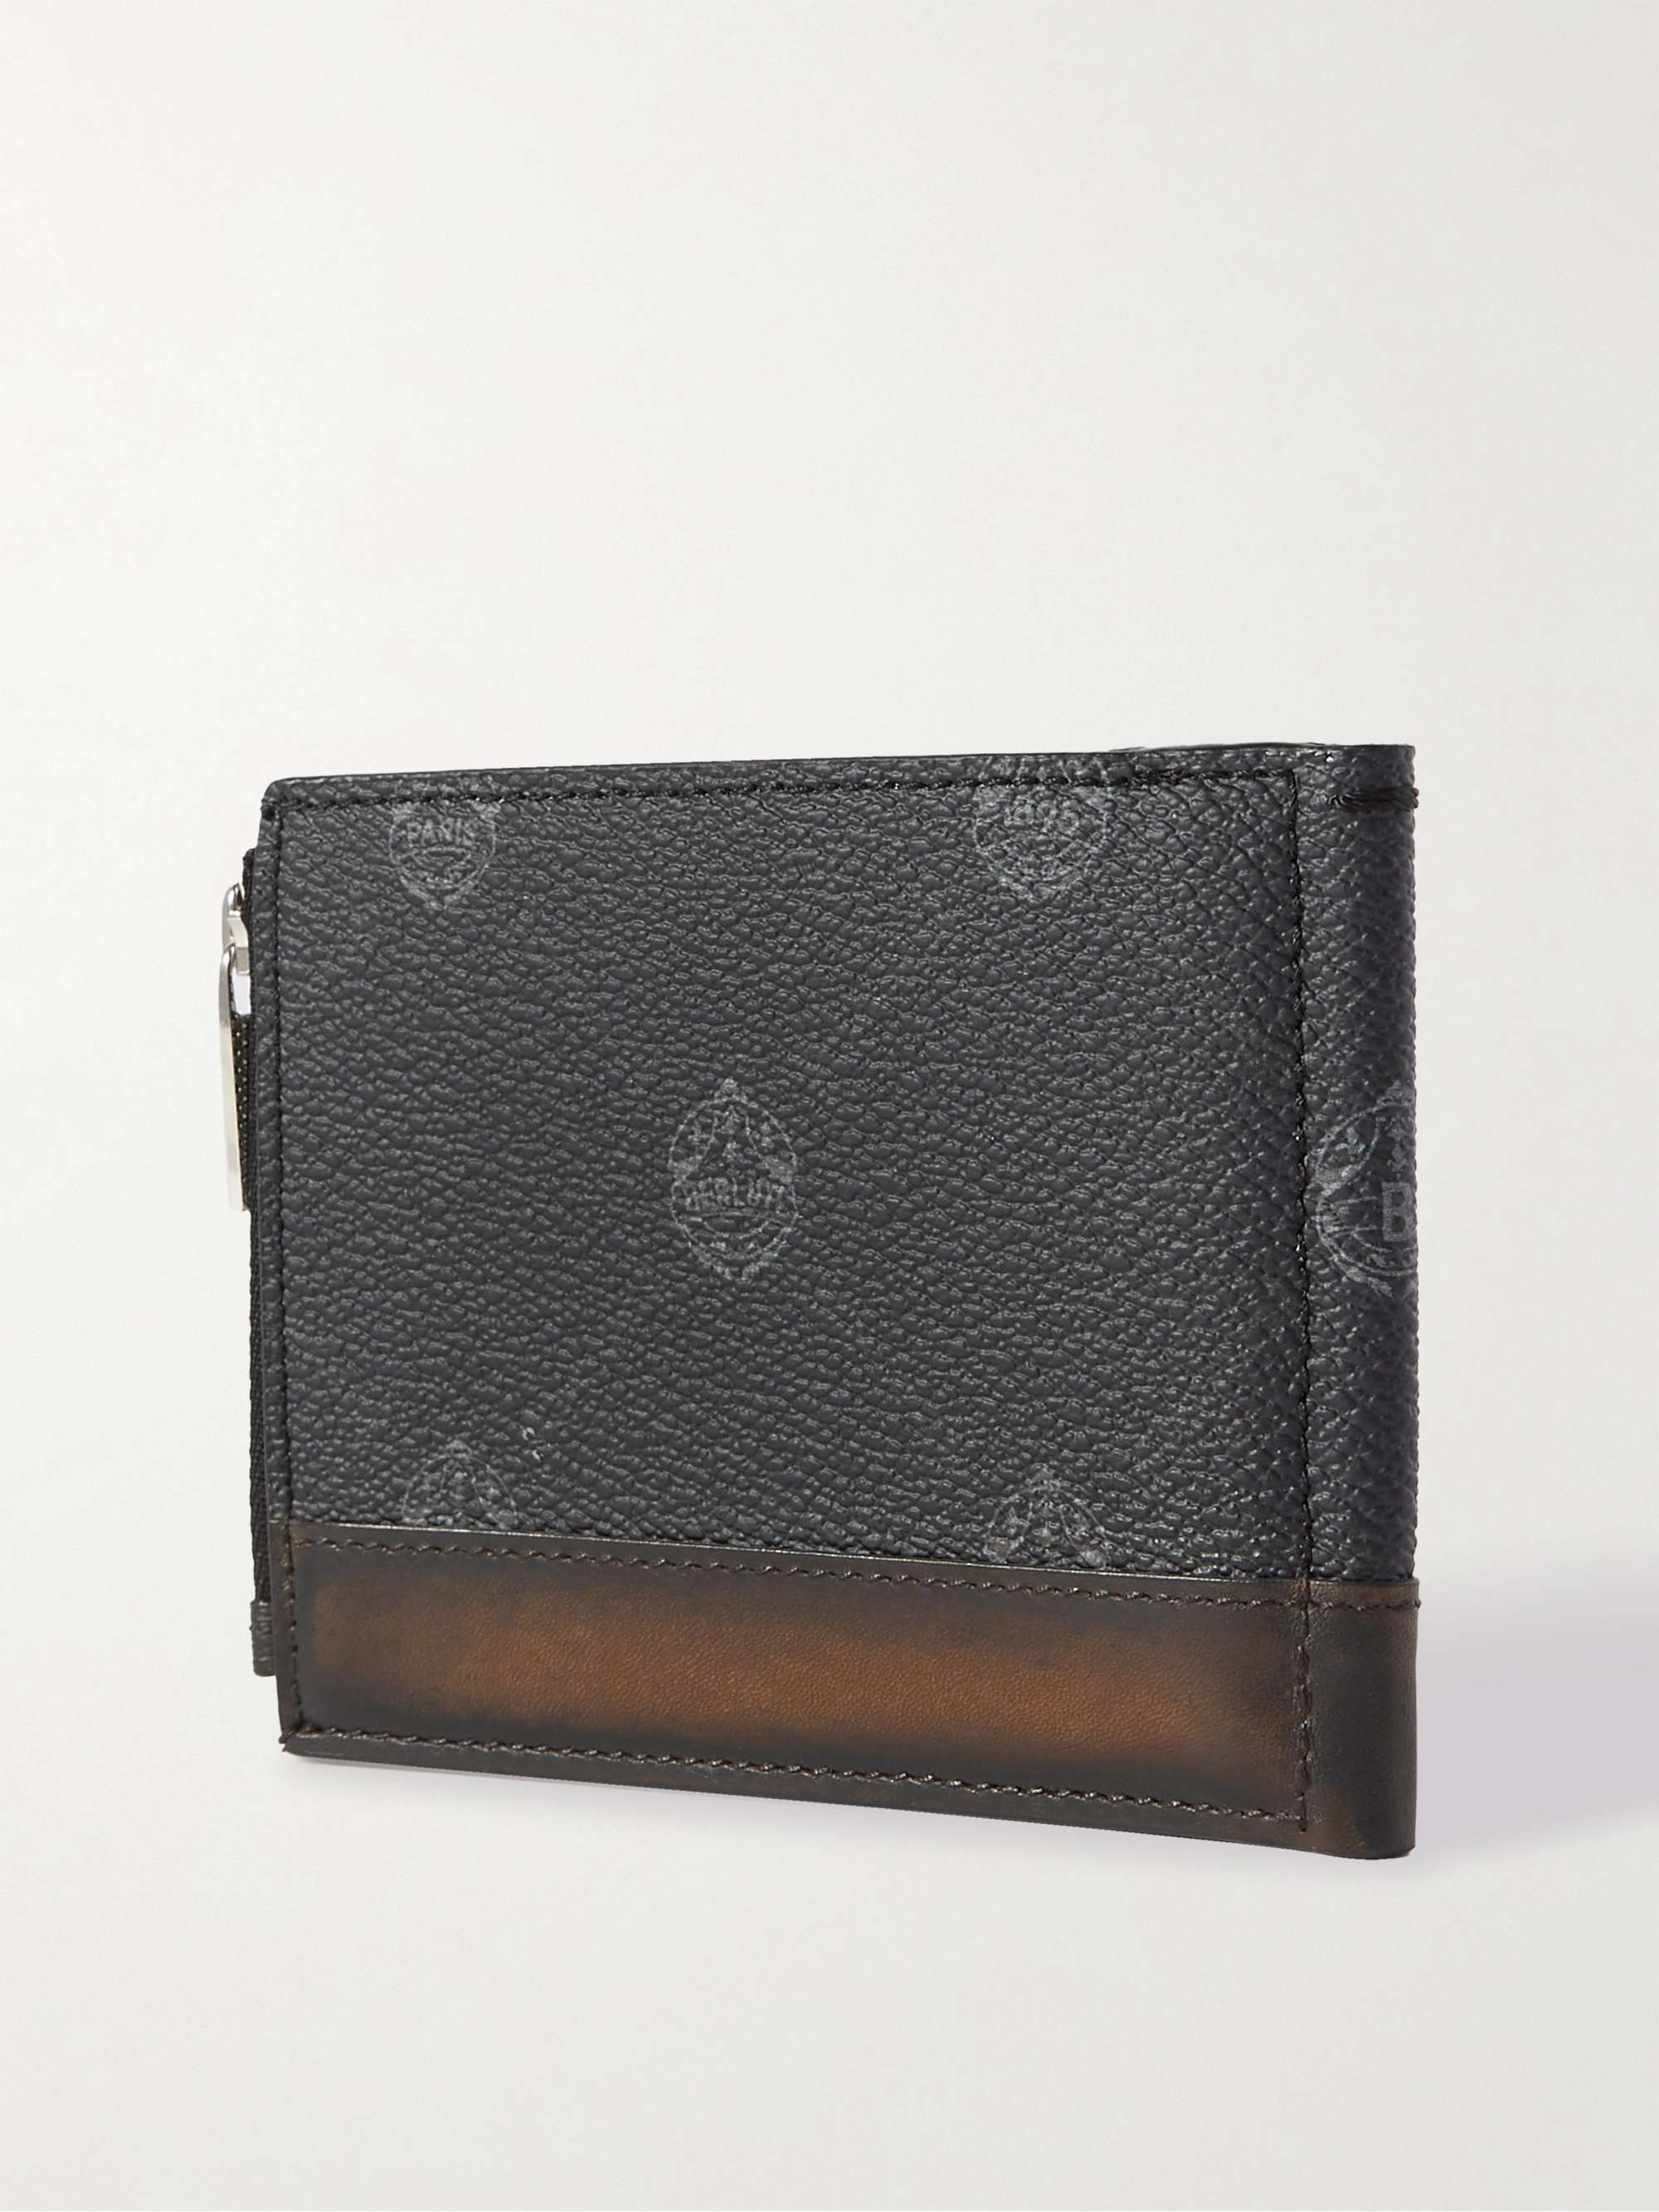 Clip Signature Canvas and Leather Billfold Wallet